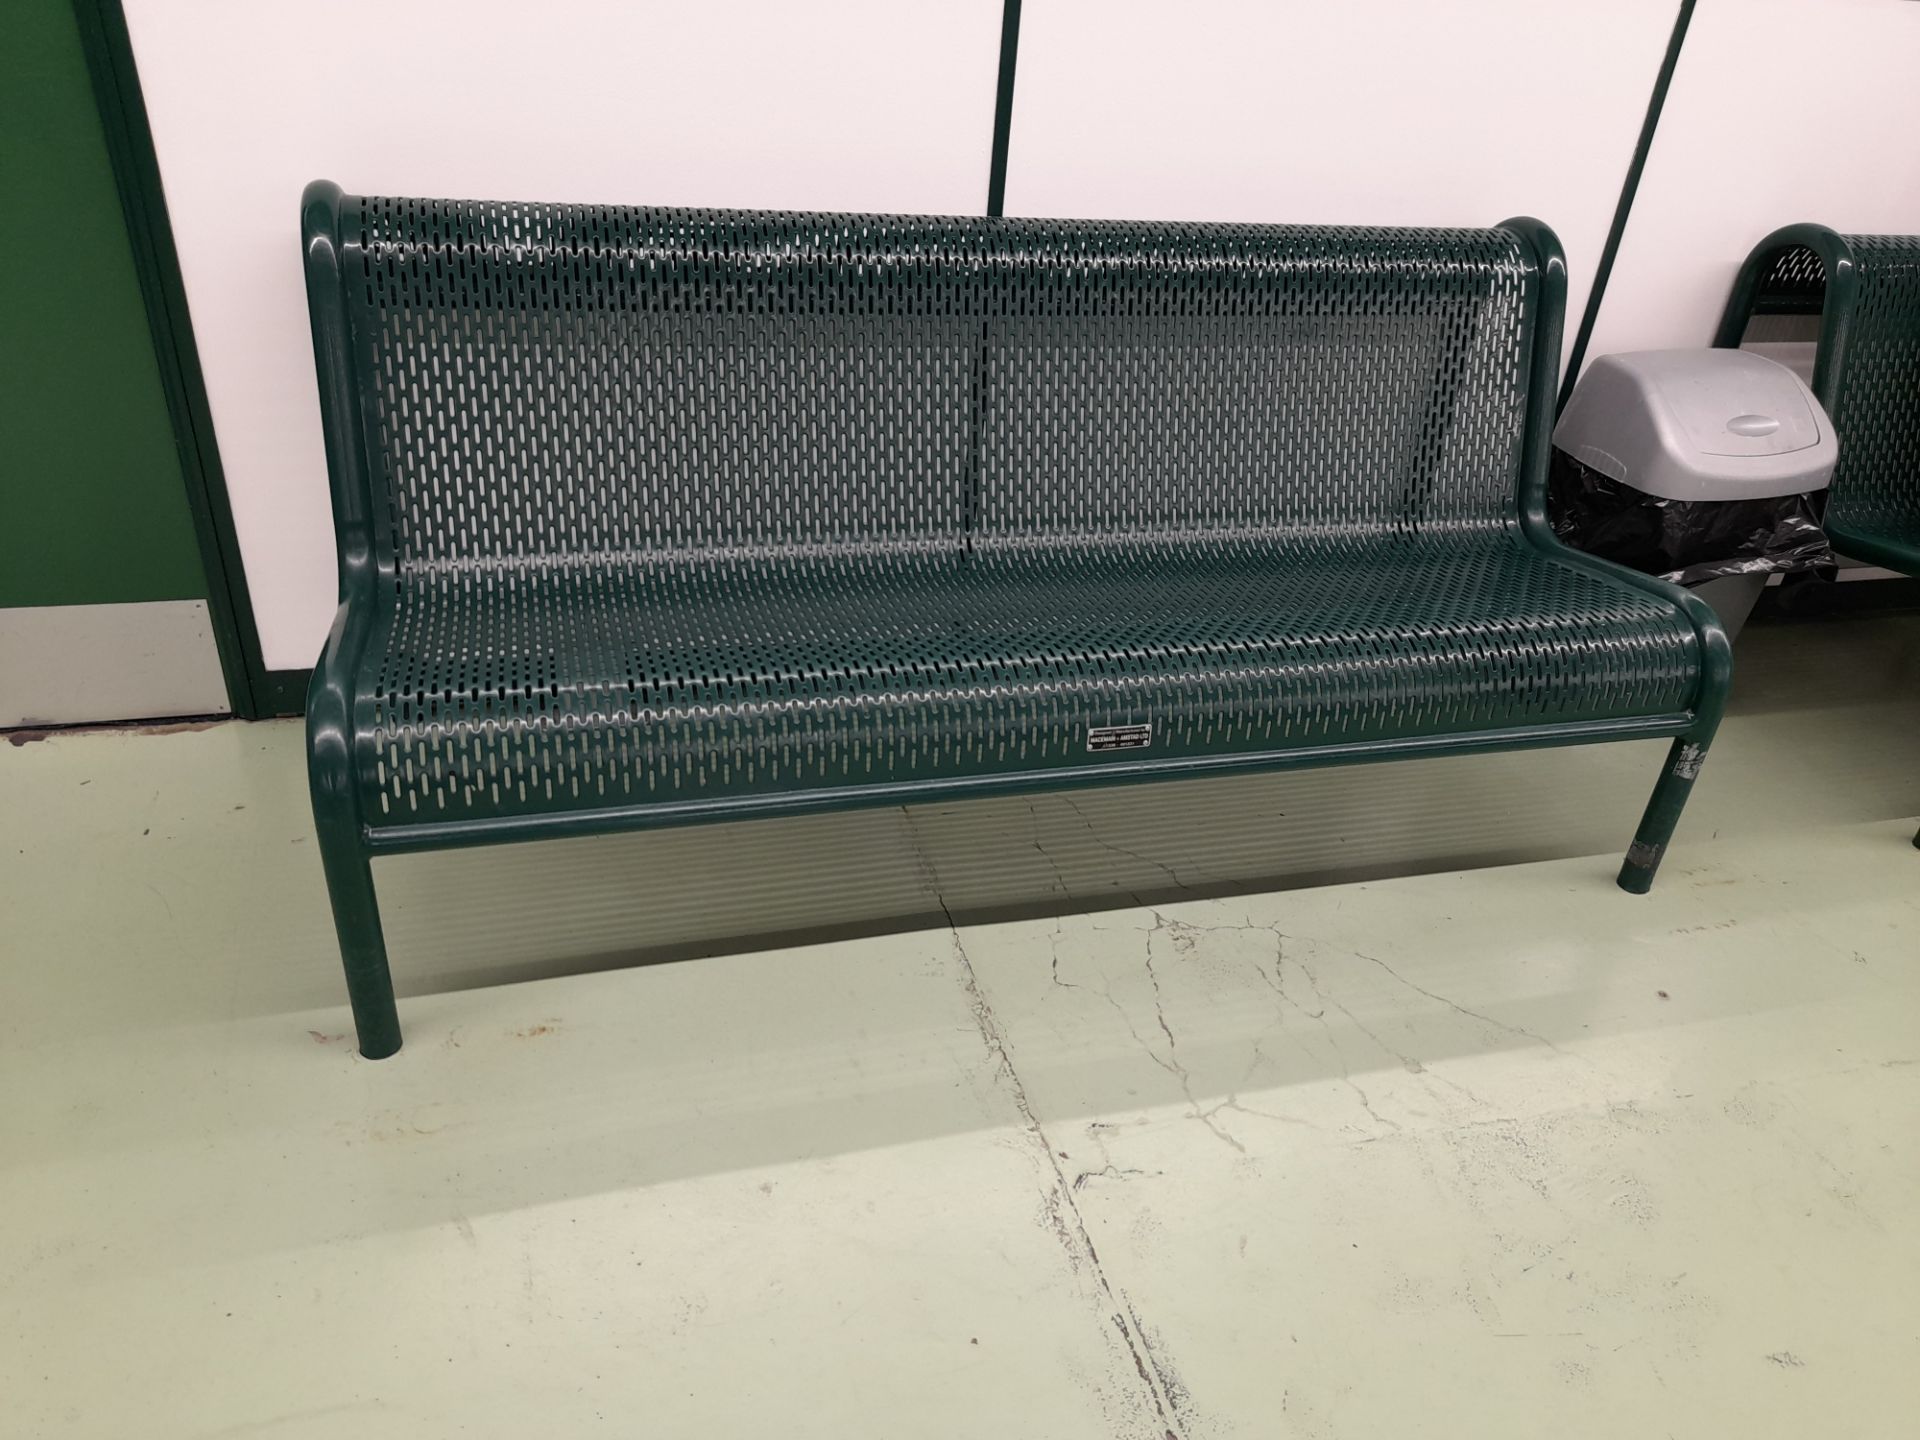 2 x Macemain & Amstad Ltd plastic-coated steel benches (only available for removal Friday 5th - Image 2 of 2